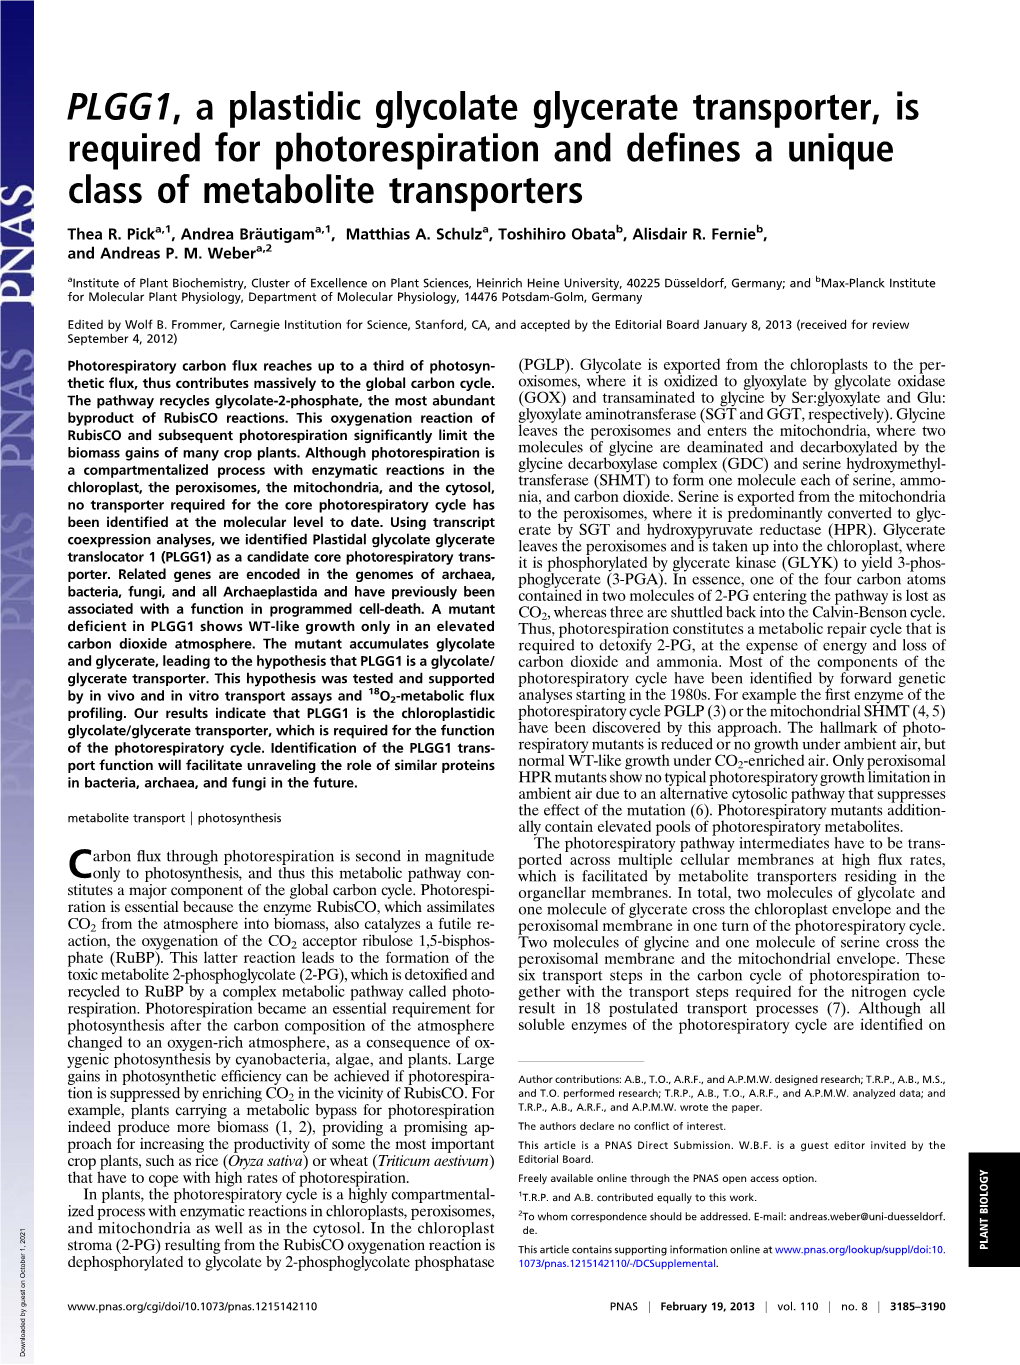 PLGG1, a Plastidic Glycolate Glycerate Transporter, Is Required for Photorespiration and Deﬁnes a Unique Class of Metabolite Transporters